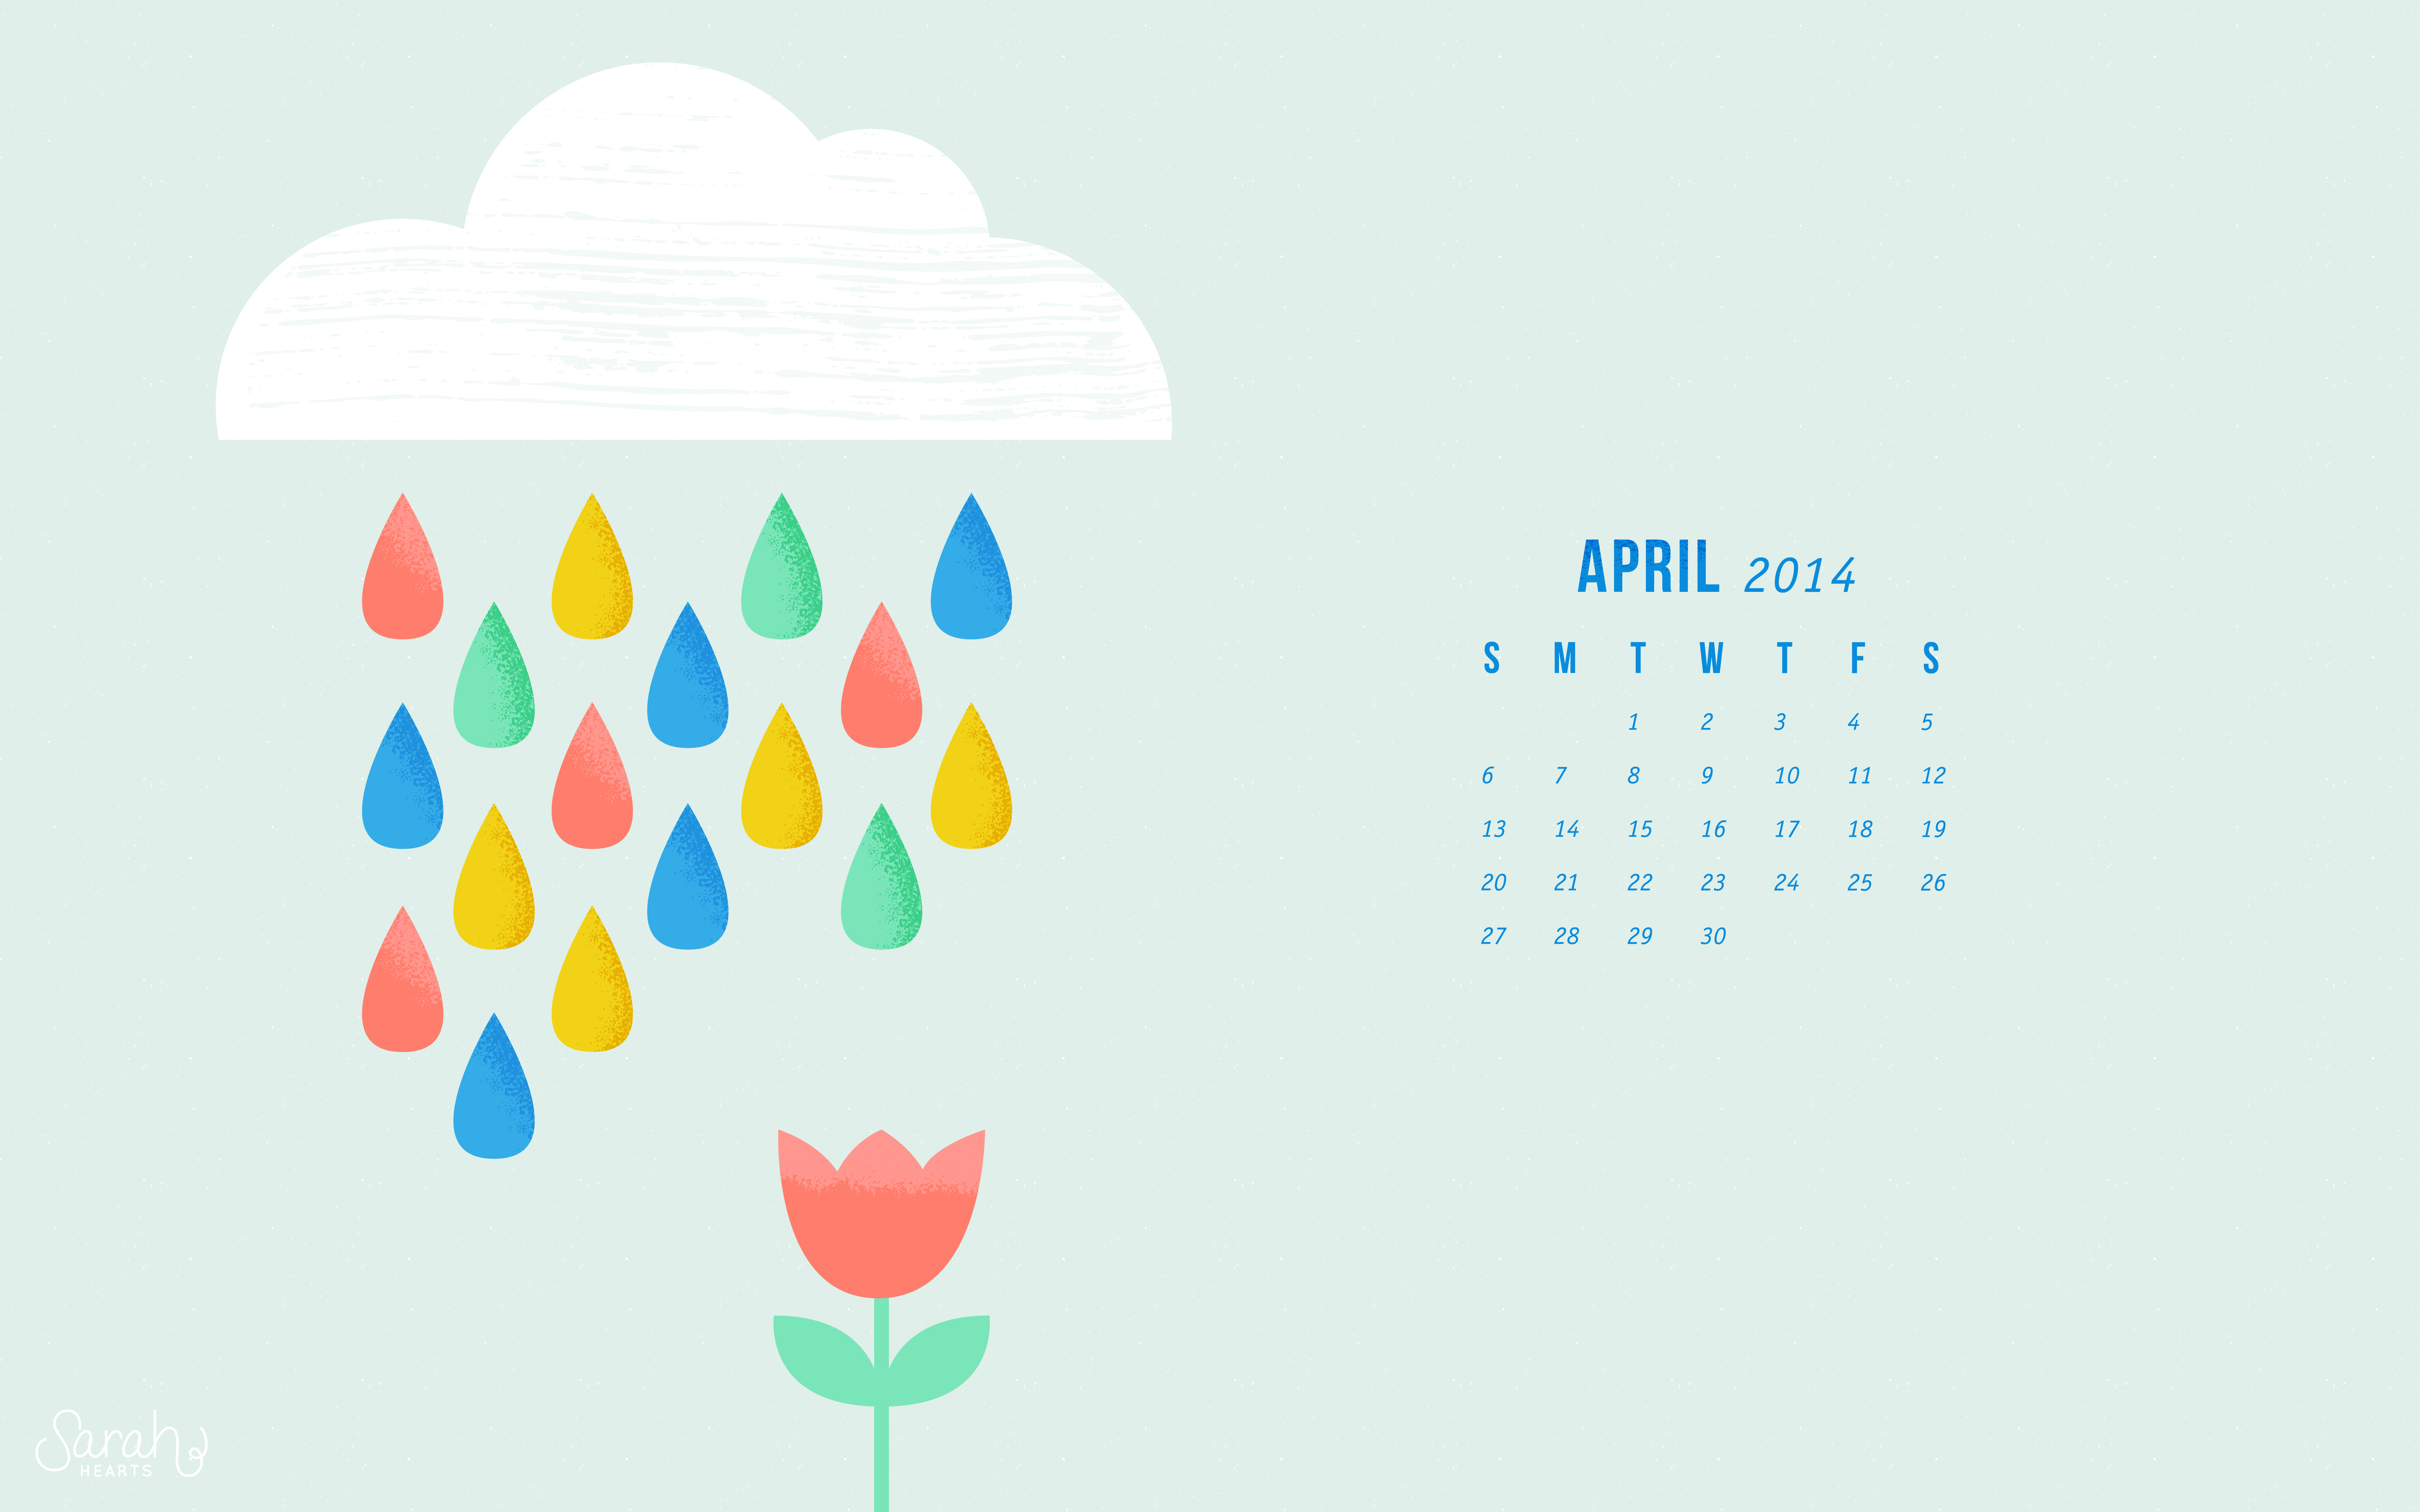 april quotes and sayings for calendars